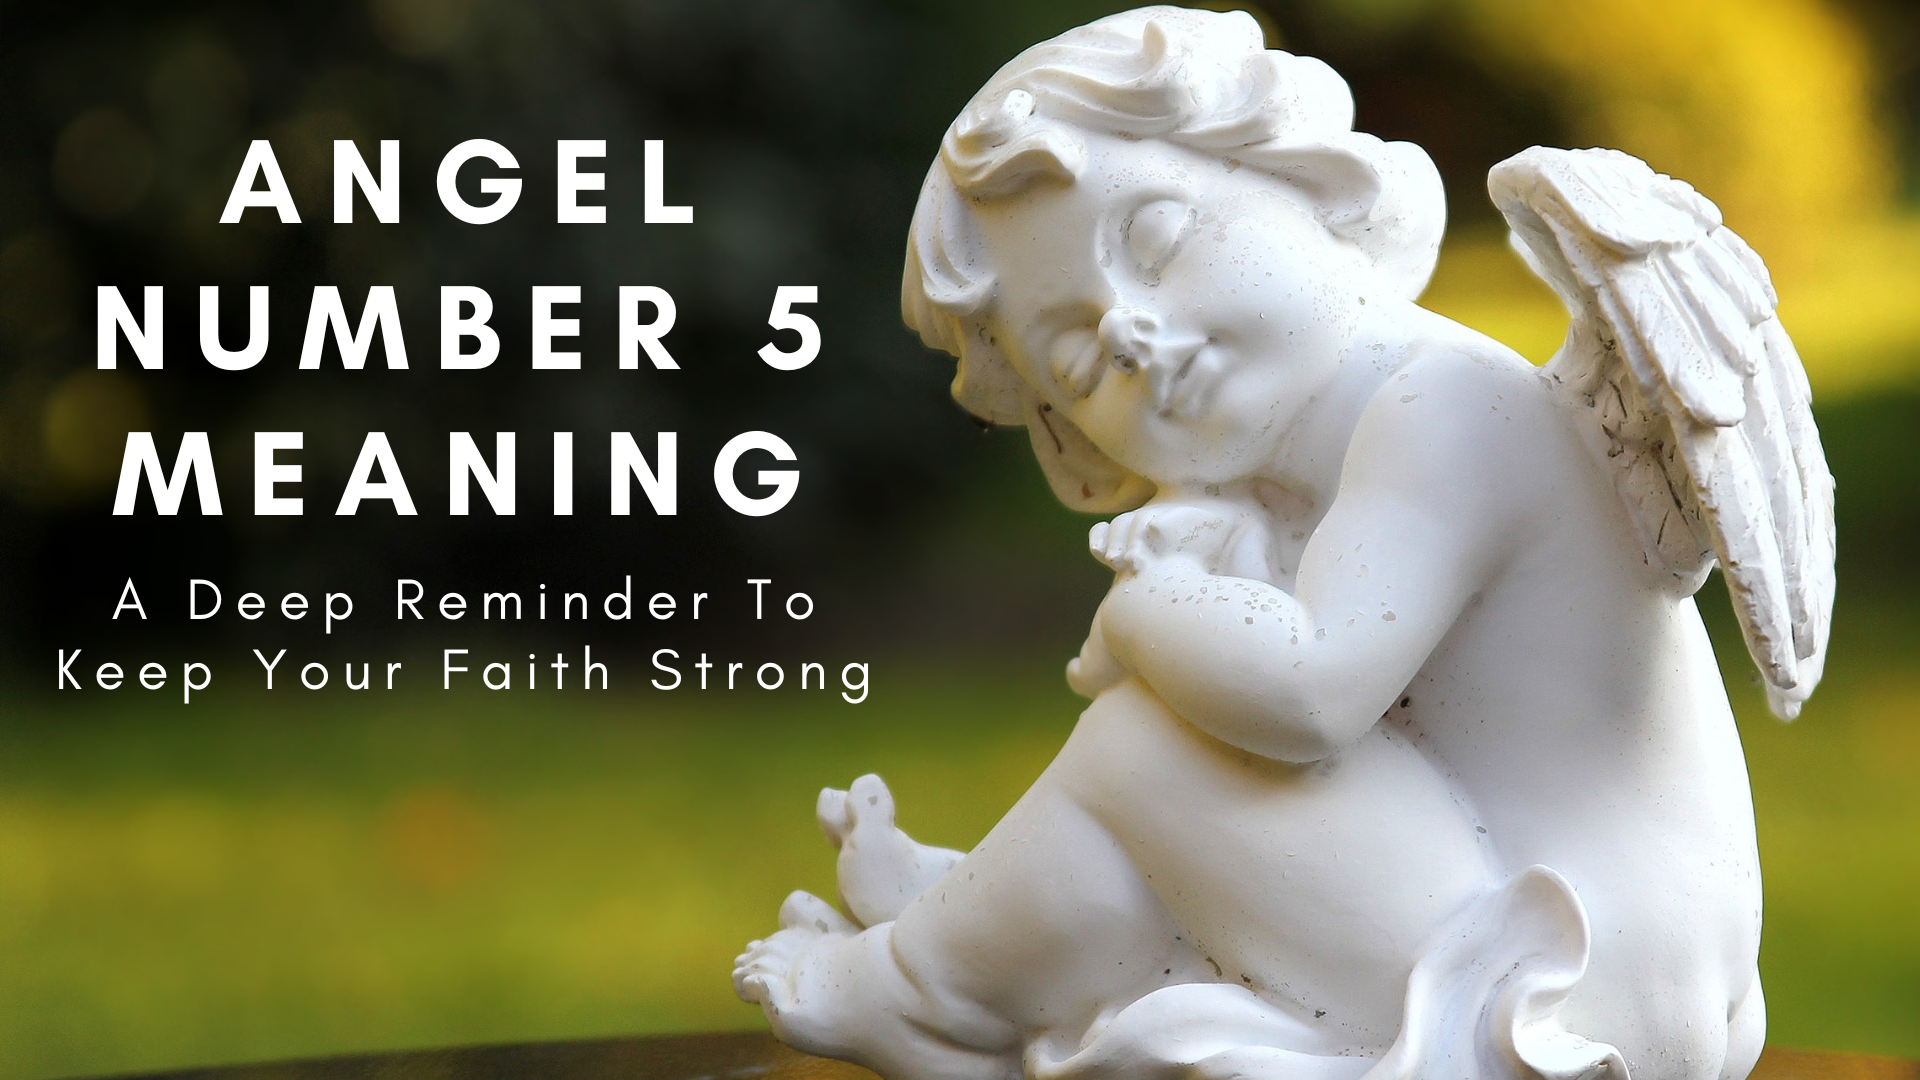 Angel Number 5 Meaning - A Deep Reminder To Keep Your Faith Strong